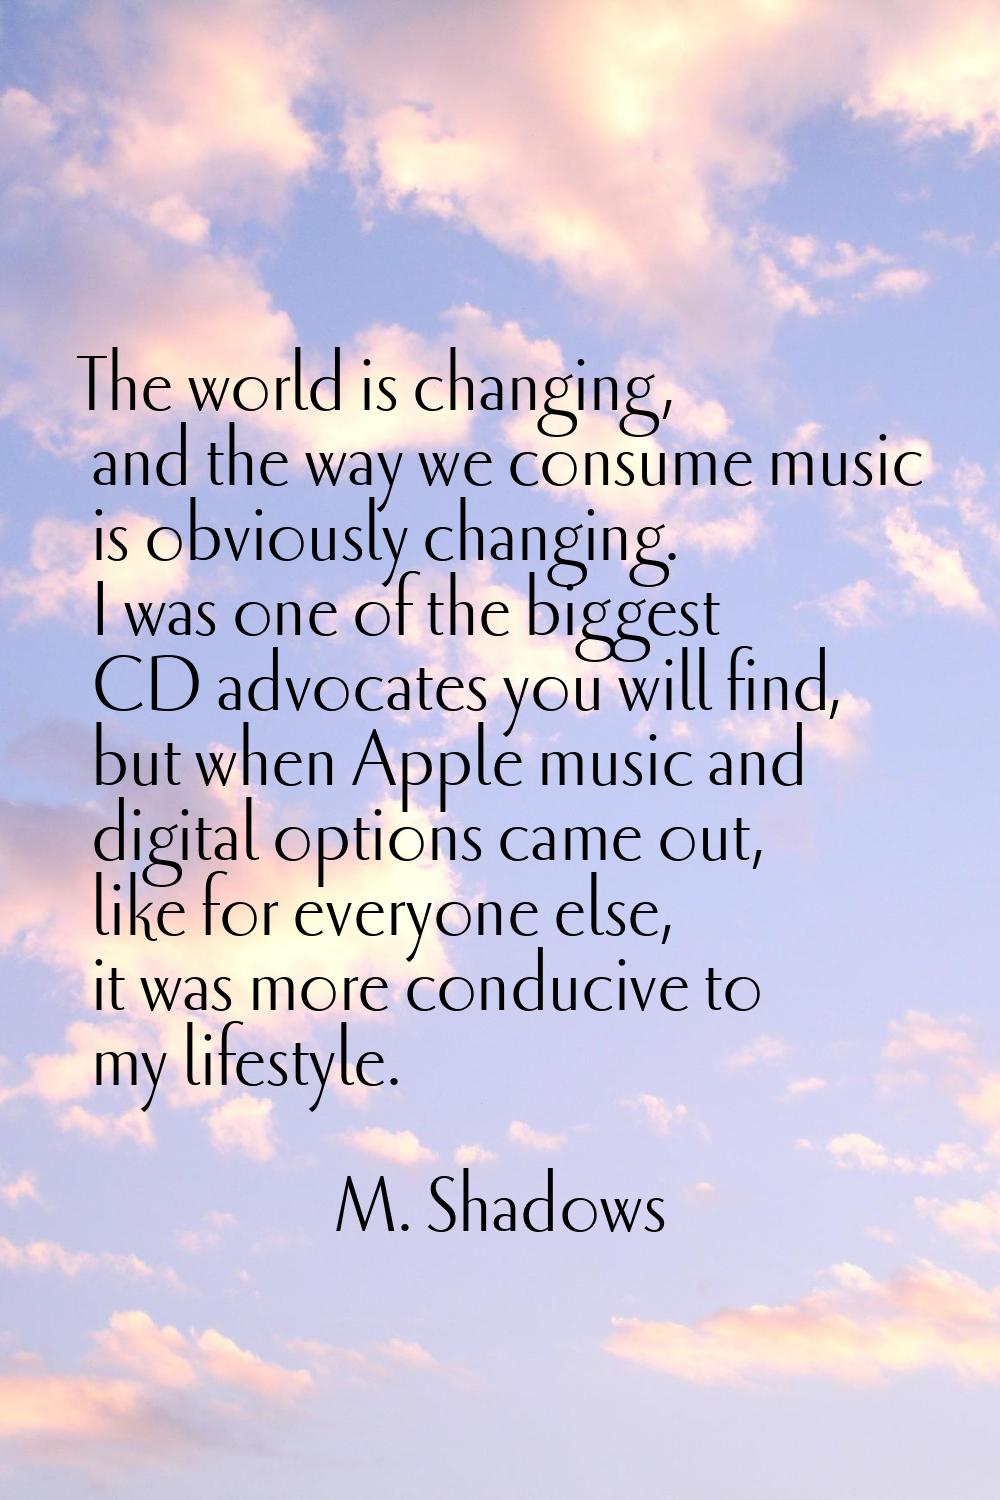 The world is changing, and the way we consume music is obviously changing. I was one of the biggest